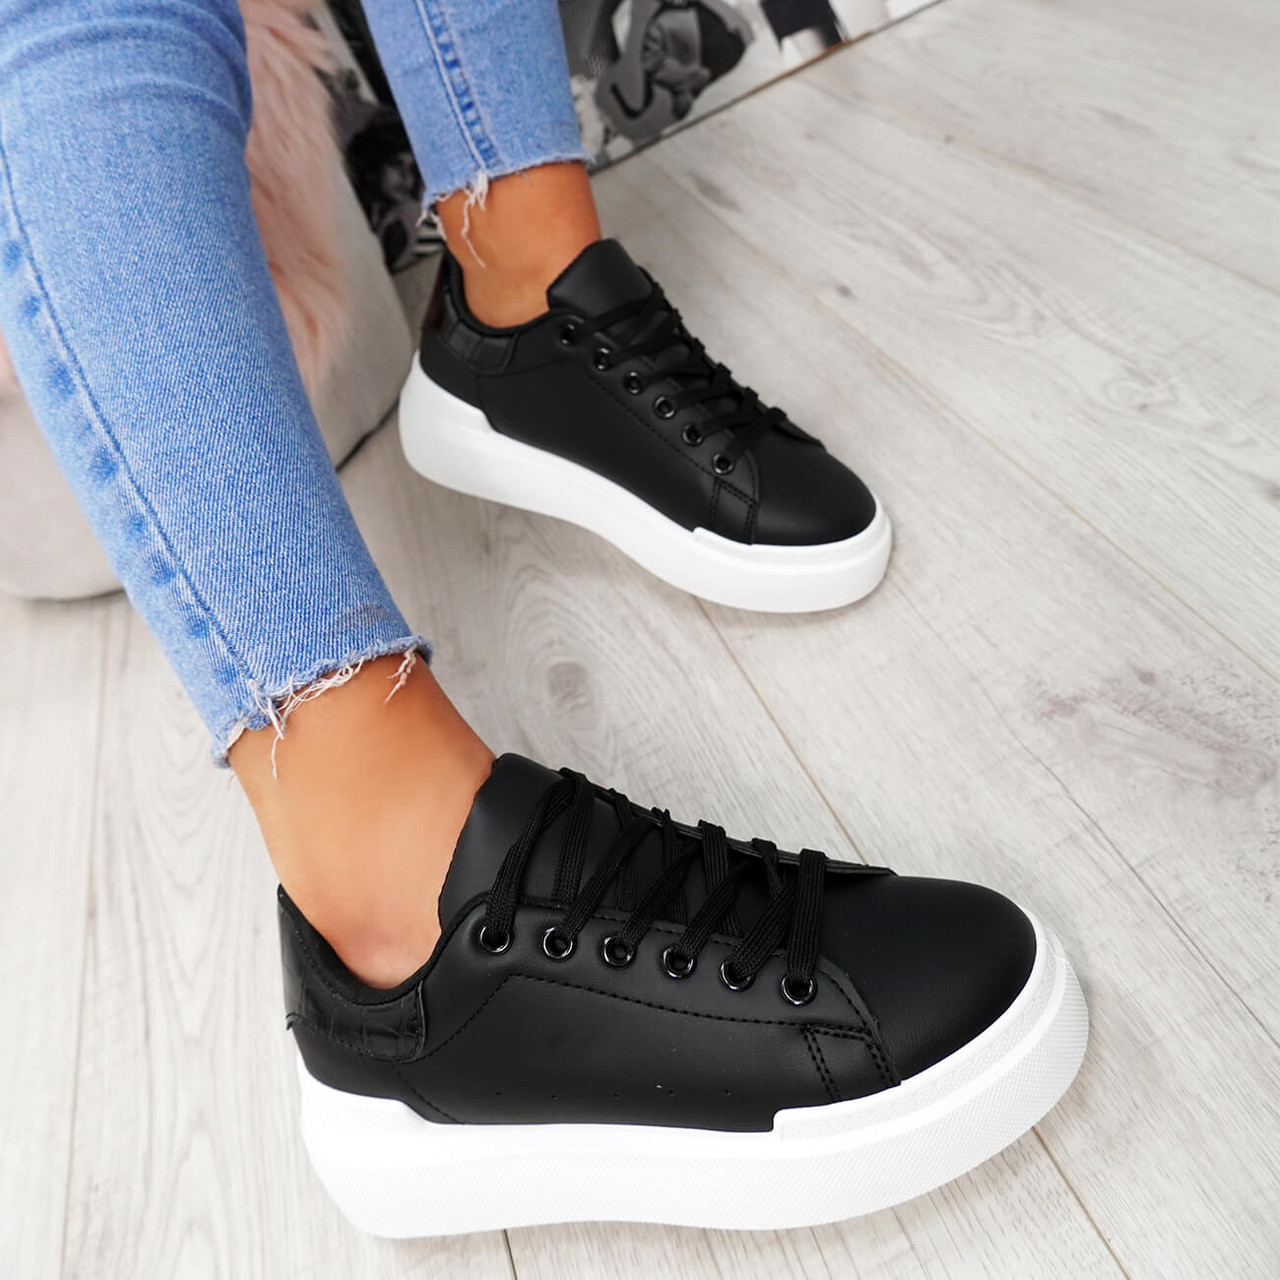 black and white platform sneakers